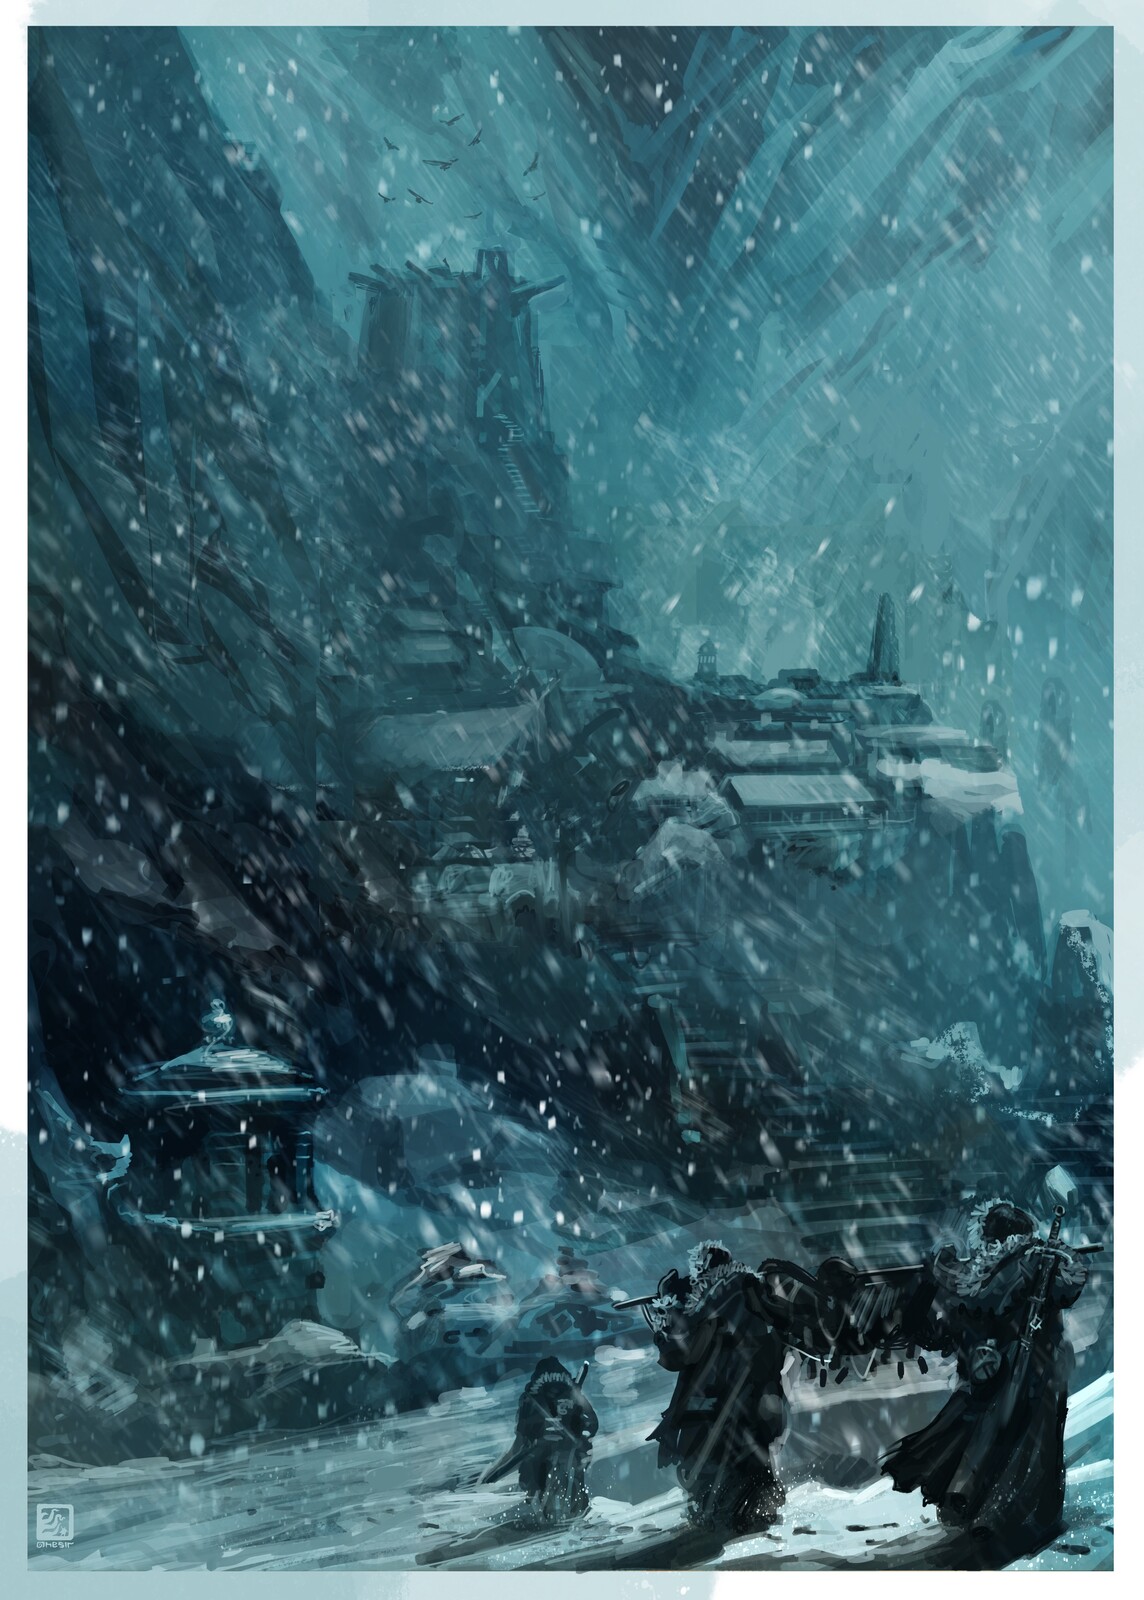 The principle setting of Jhator, showing adventurers heading towards it in a blizzard.